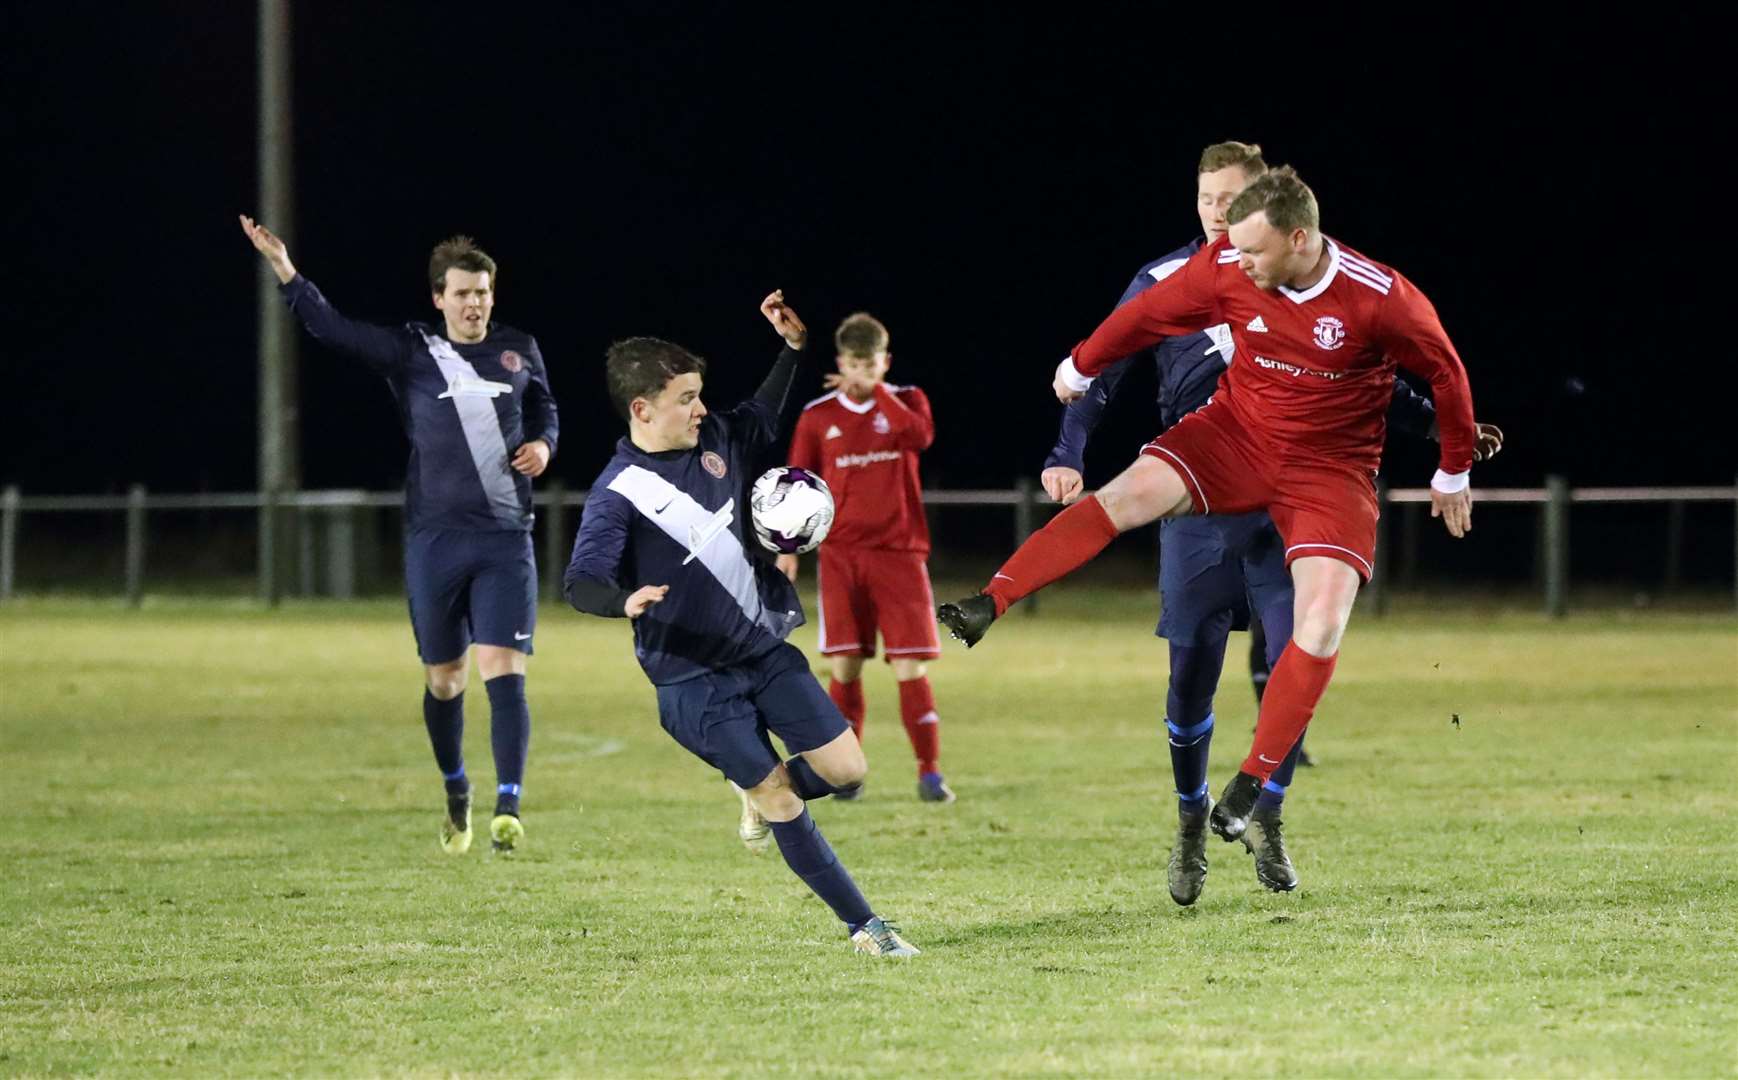 Halkirk United defender Murray Mackay clashes with high-flying James Murray of Thurso during a Caithness derby in February this year. Picture: James Gunn